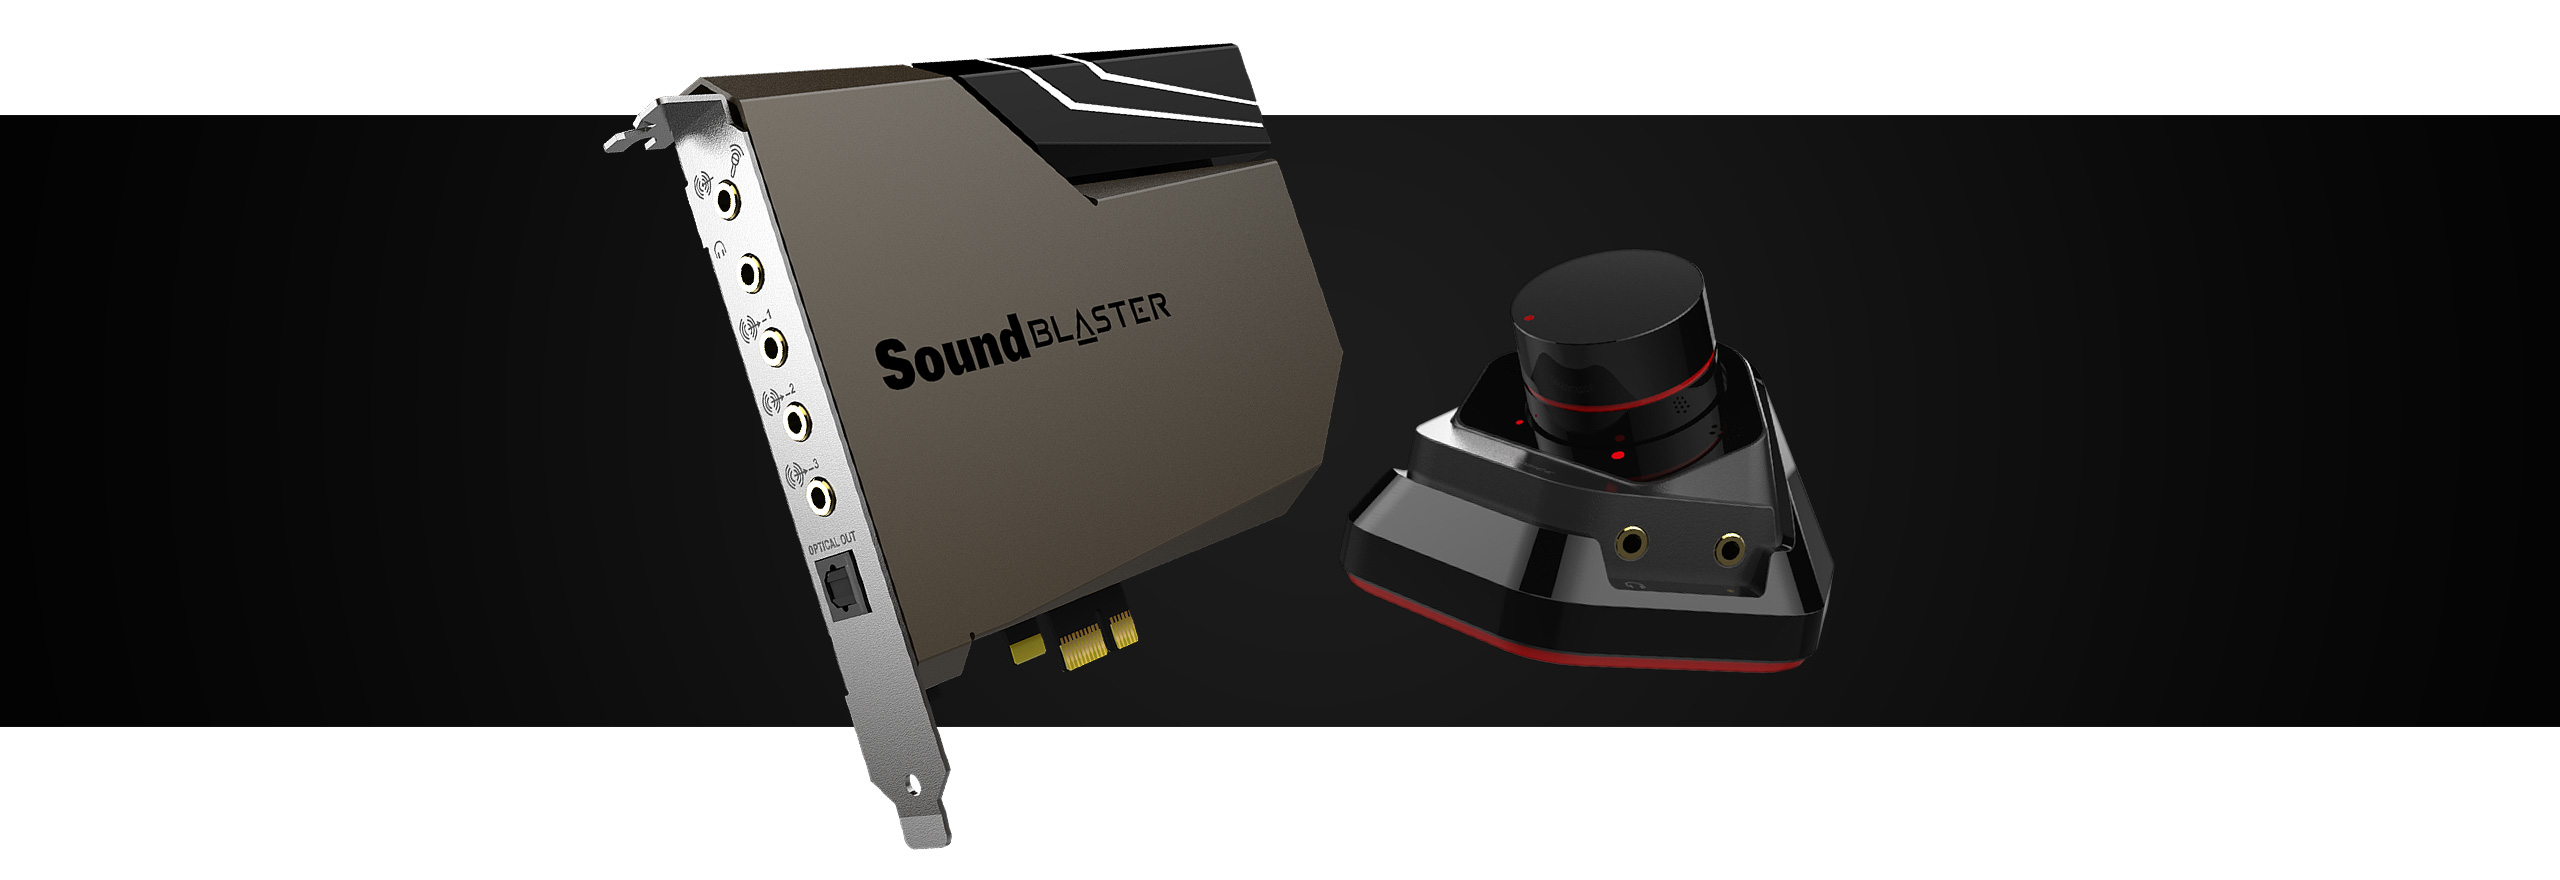 Sound Blaster AE-7 - Hi-res PCI-e DAC and Amp Sound Card with Xamp 